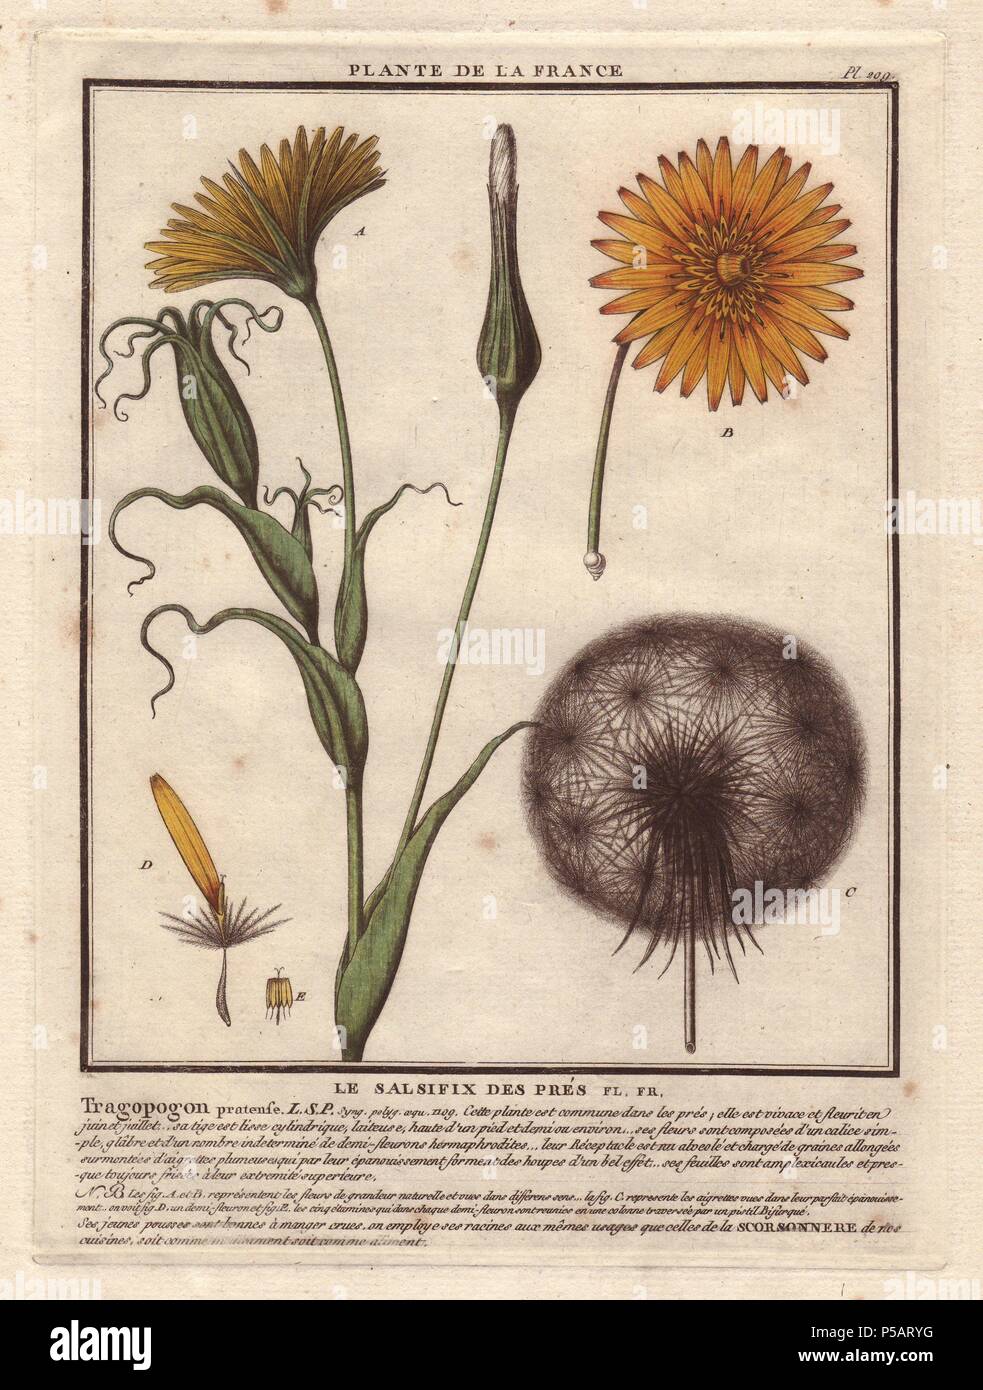 Meadow Salsify (Tragopogon pratensis).. . French botanist Jean Baptiste François Pierre Bulliard was born around 1742 at Aubepierre-en-Barrois (Haute Marne) and died on 26 September 1793 in Paris. He studied at Angers, and later illustrated and published a number of botanical and mycological works on French flora. He studied art and engraving under Francois Martinet, the celebrated artist of many of Buffon's natural history books. Stock Photo